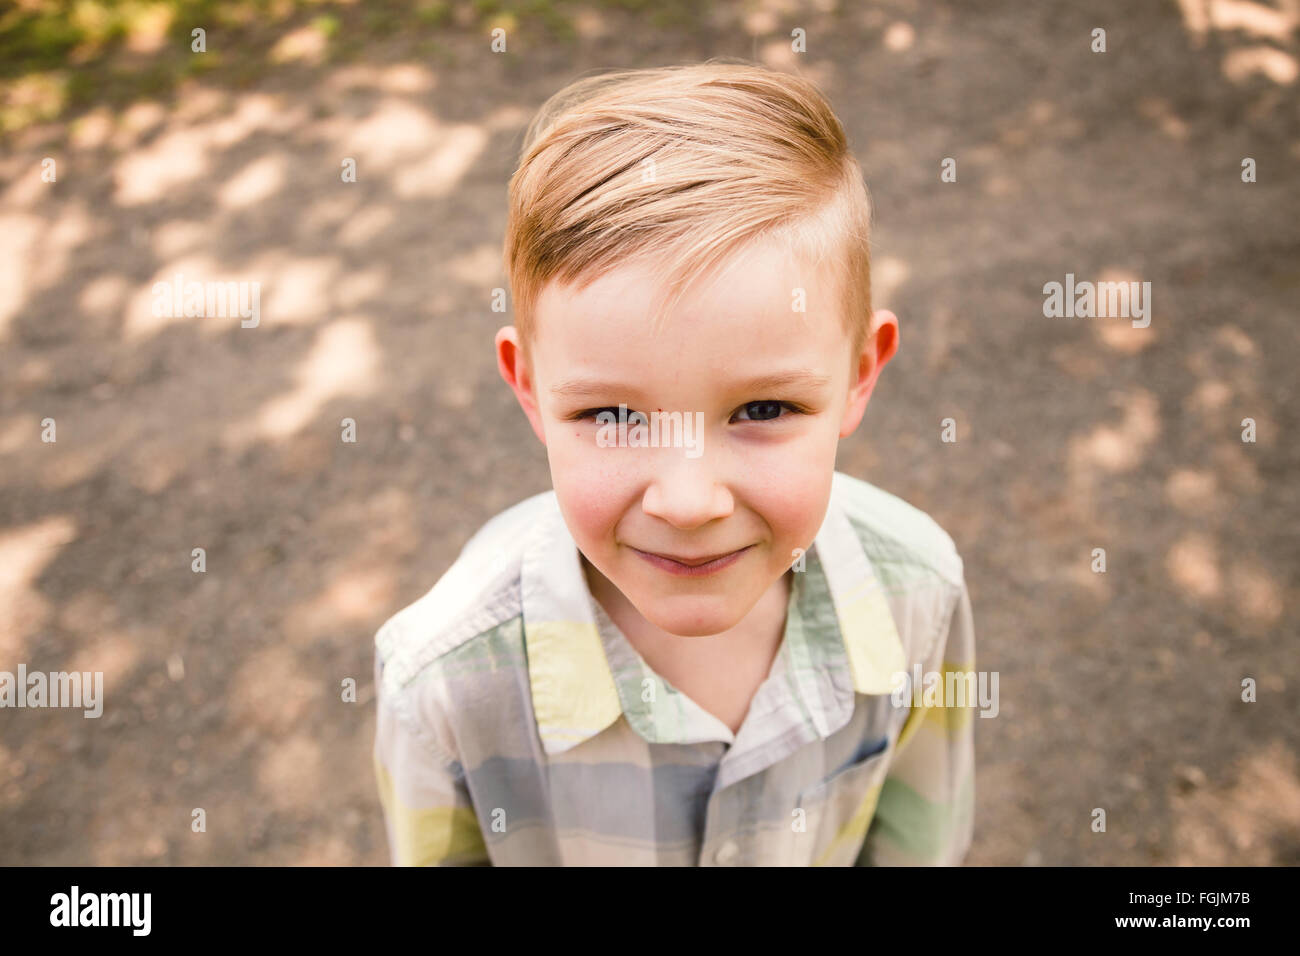 Young boy outdoors in a lifestyle portrait with natural light. Stock Photo